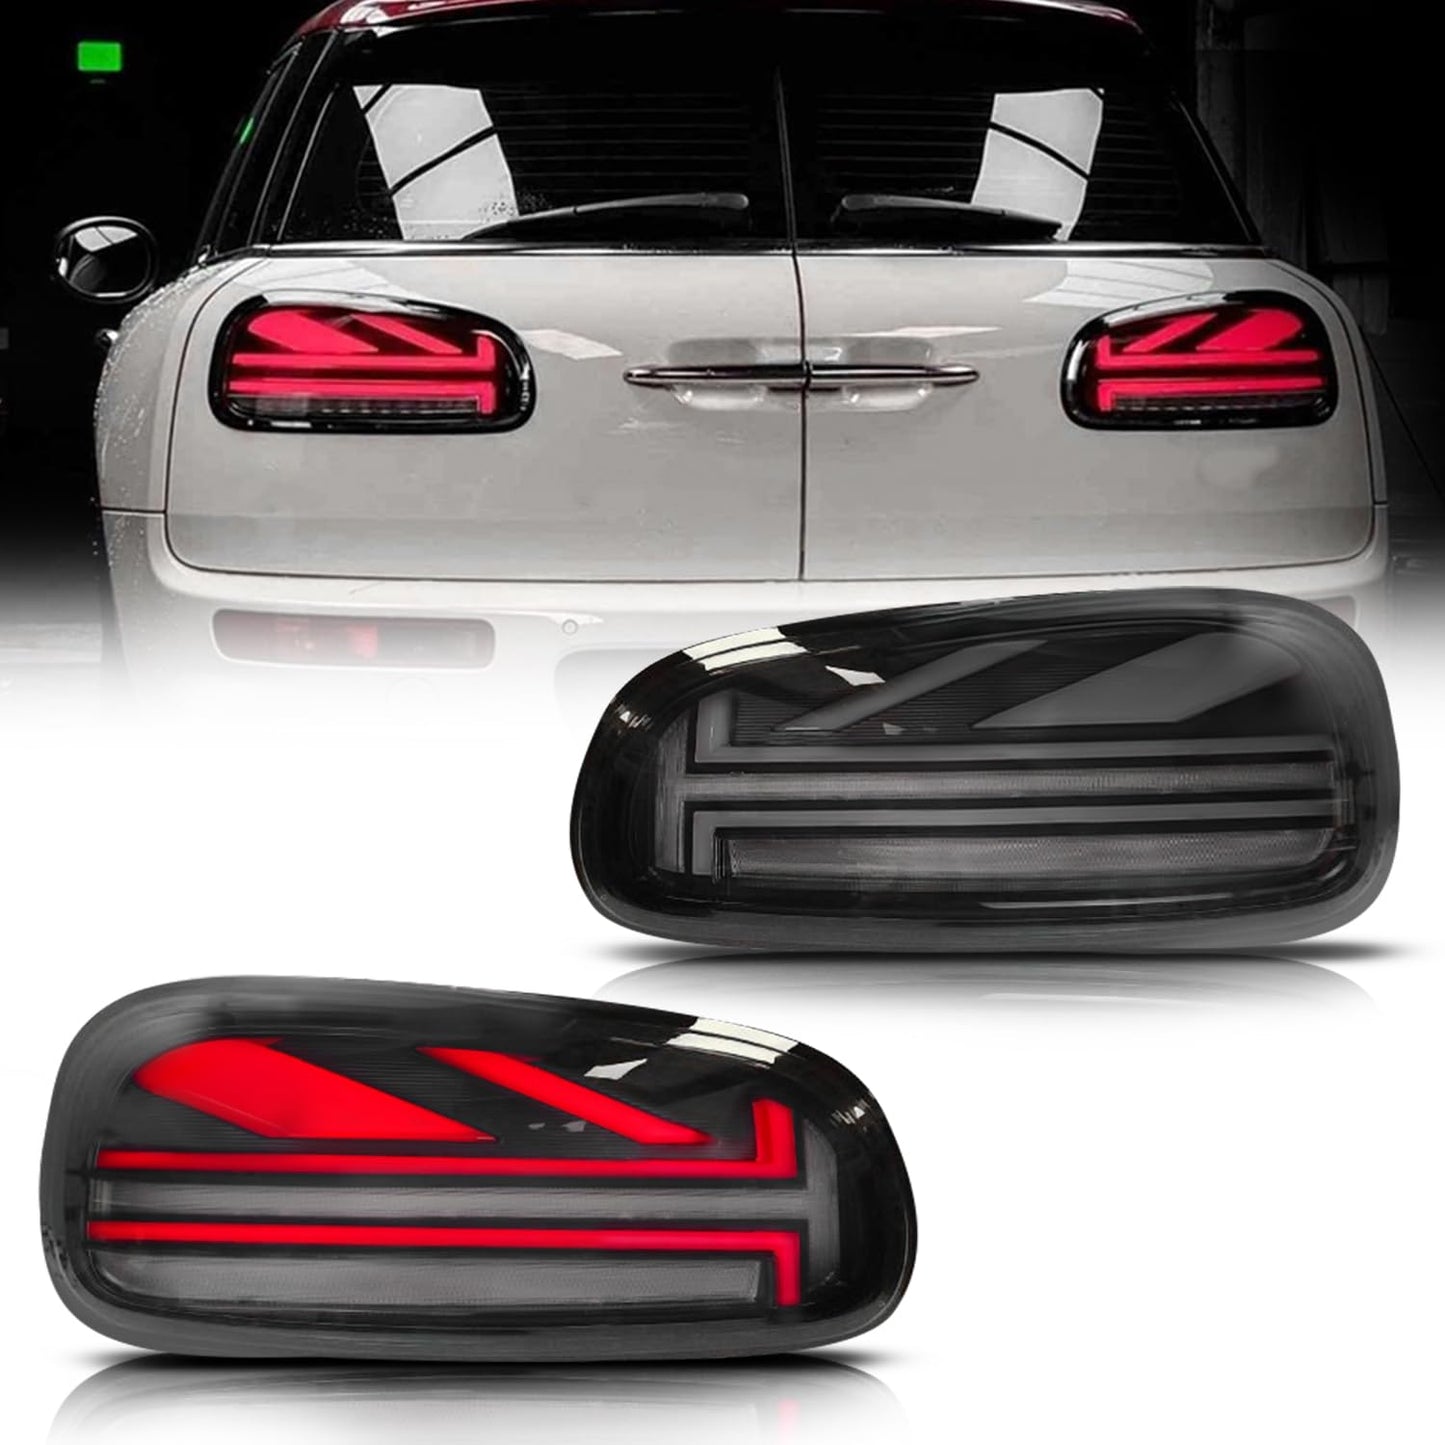 Full LED Tail Lights Assembly For Mini Clubman F54 2015-2019